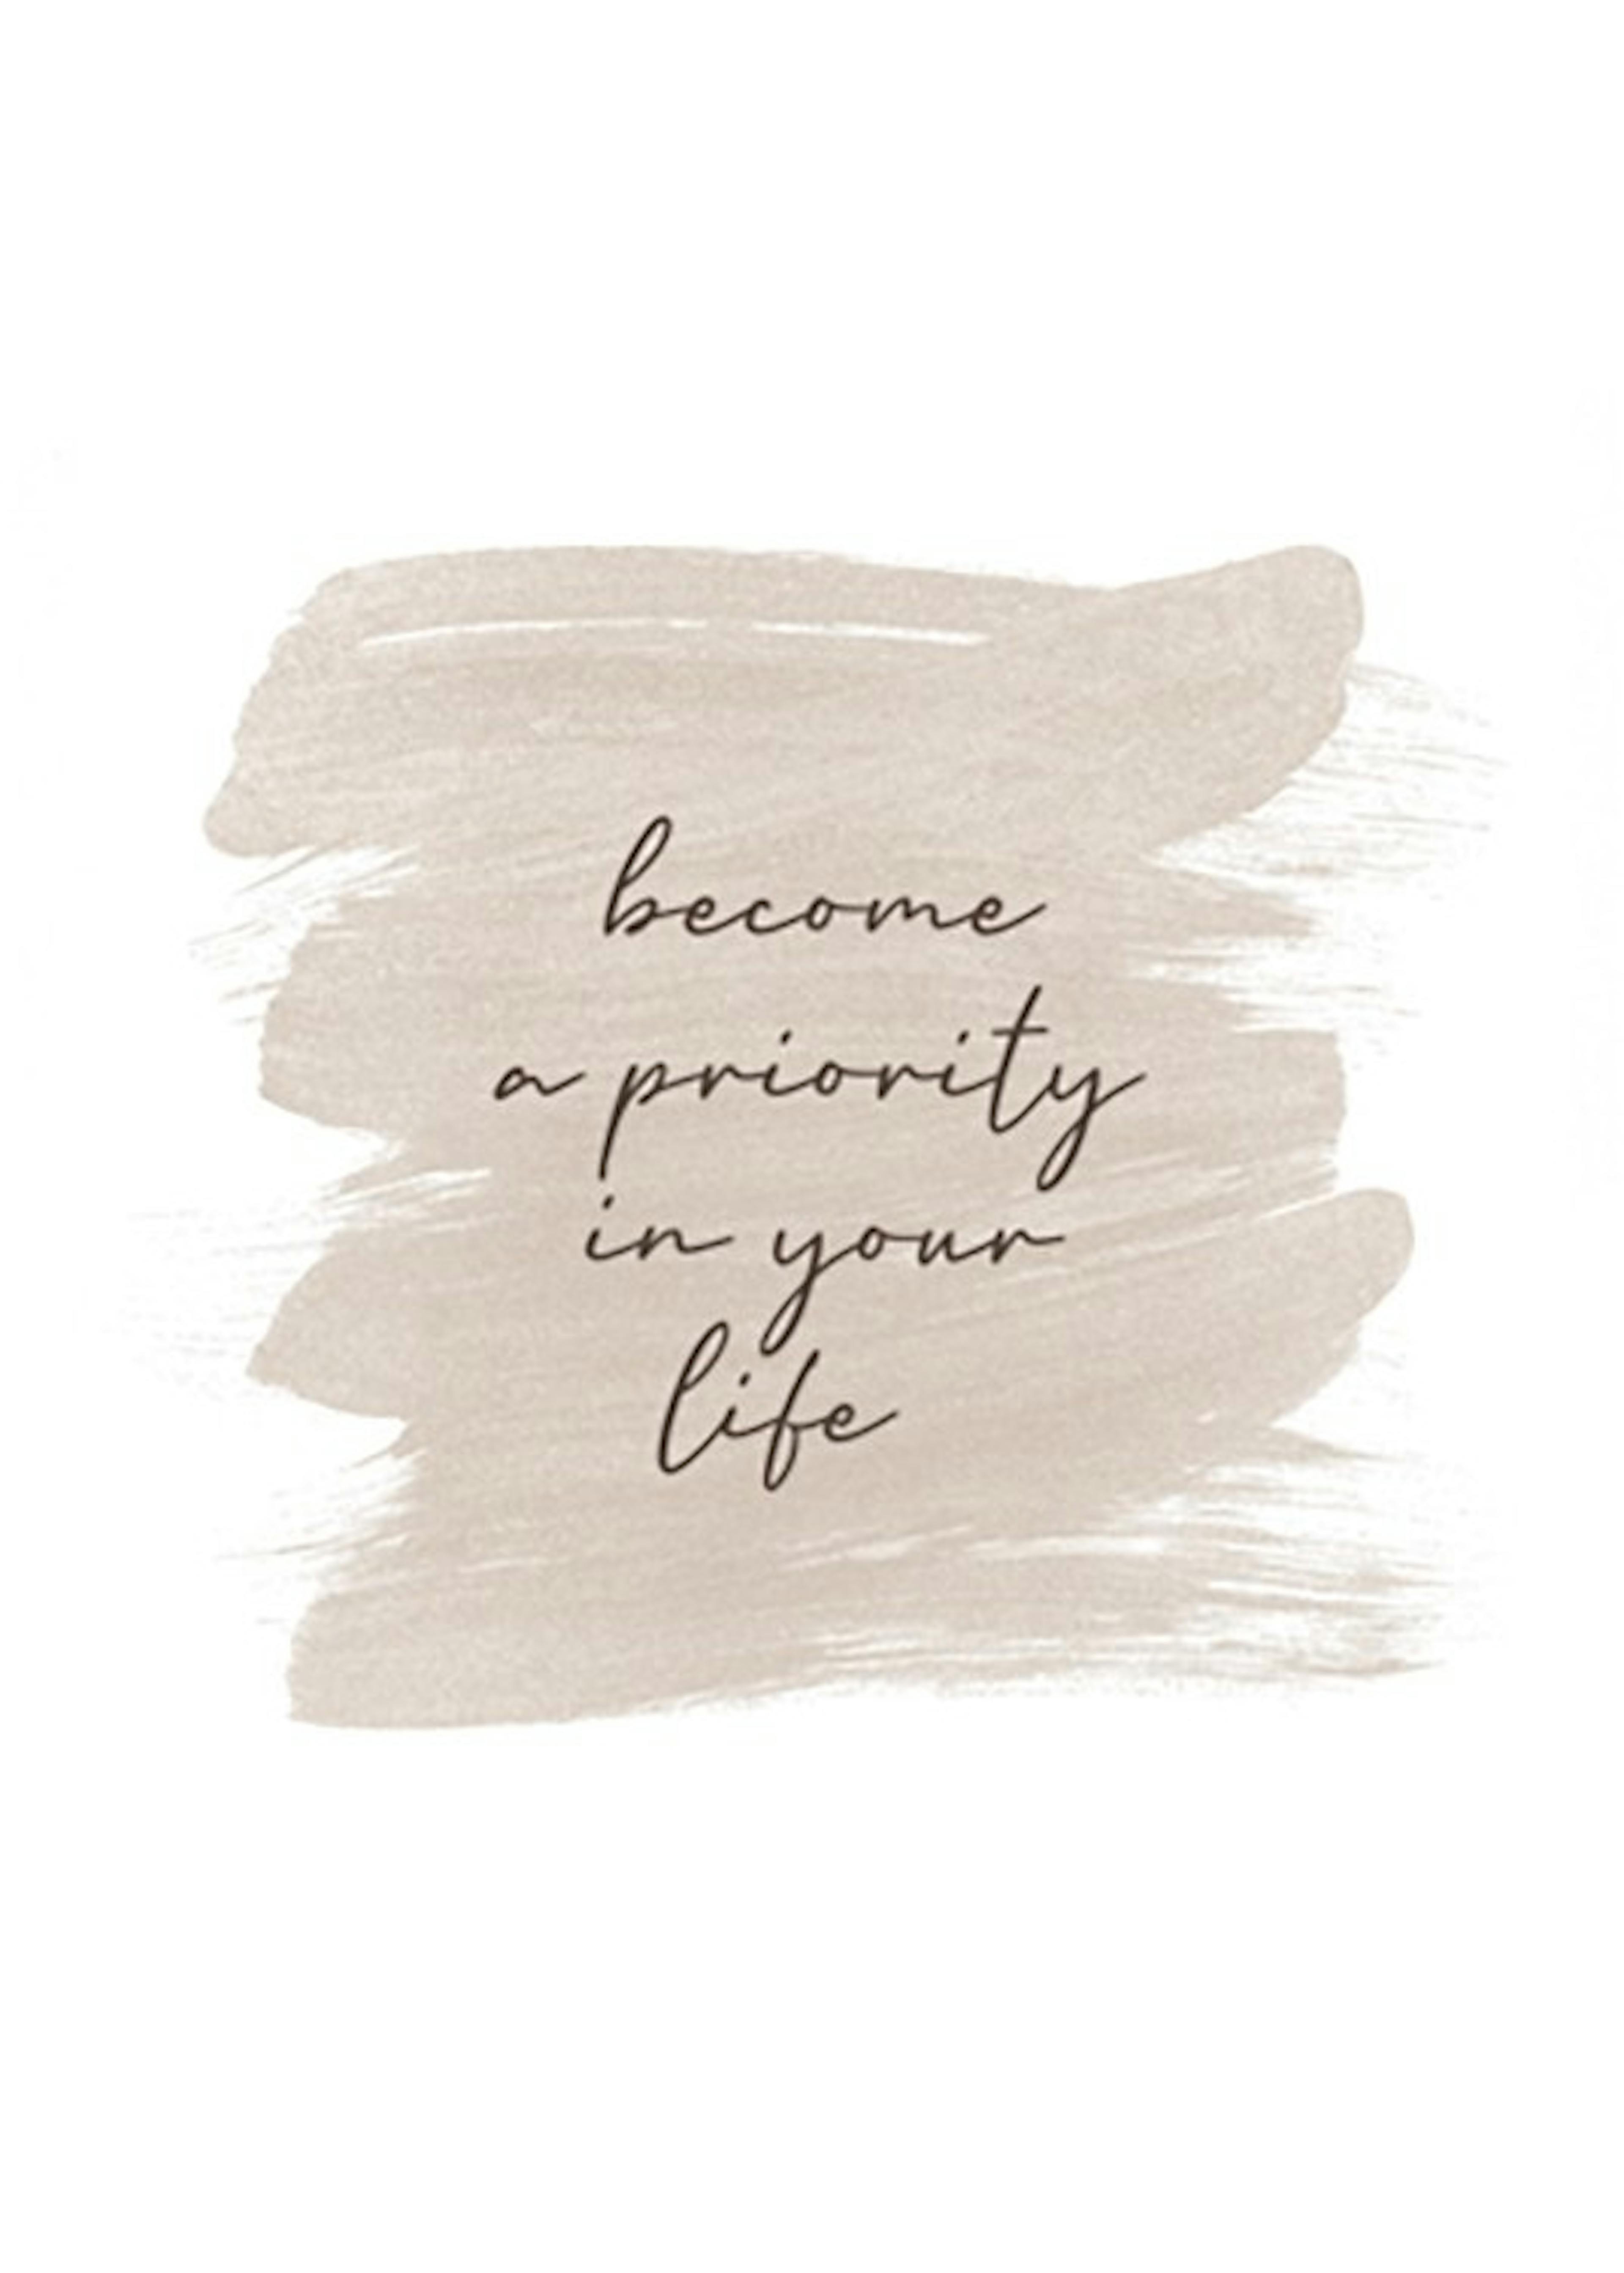 Become A Priority Poster 0